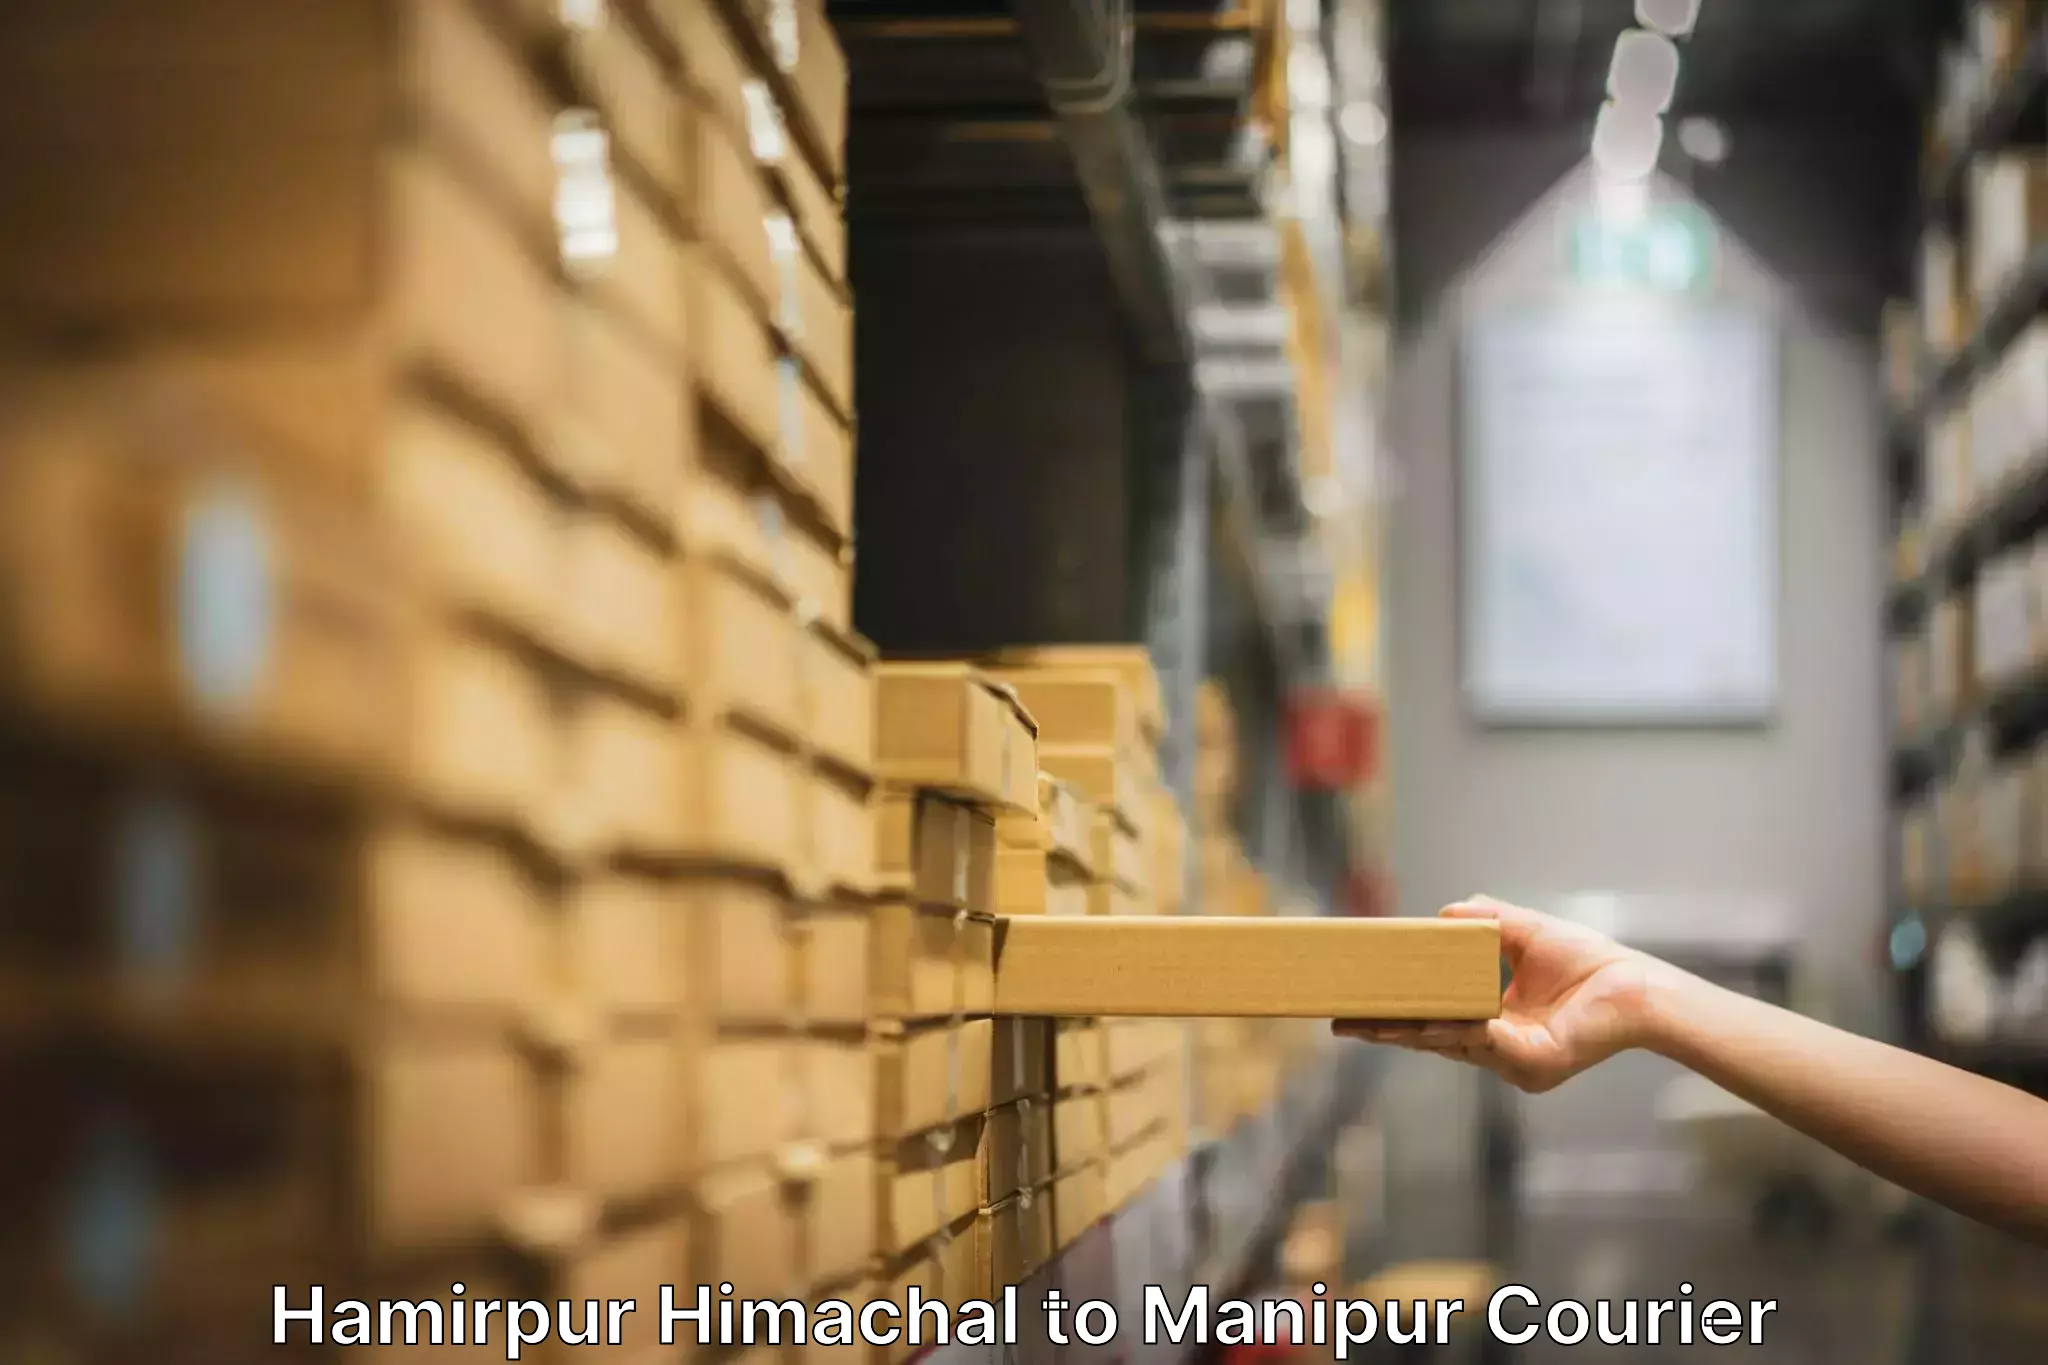 Efficient moving company Hamirpur Himachal to Manipur